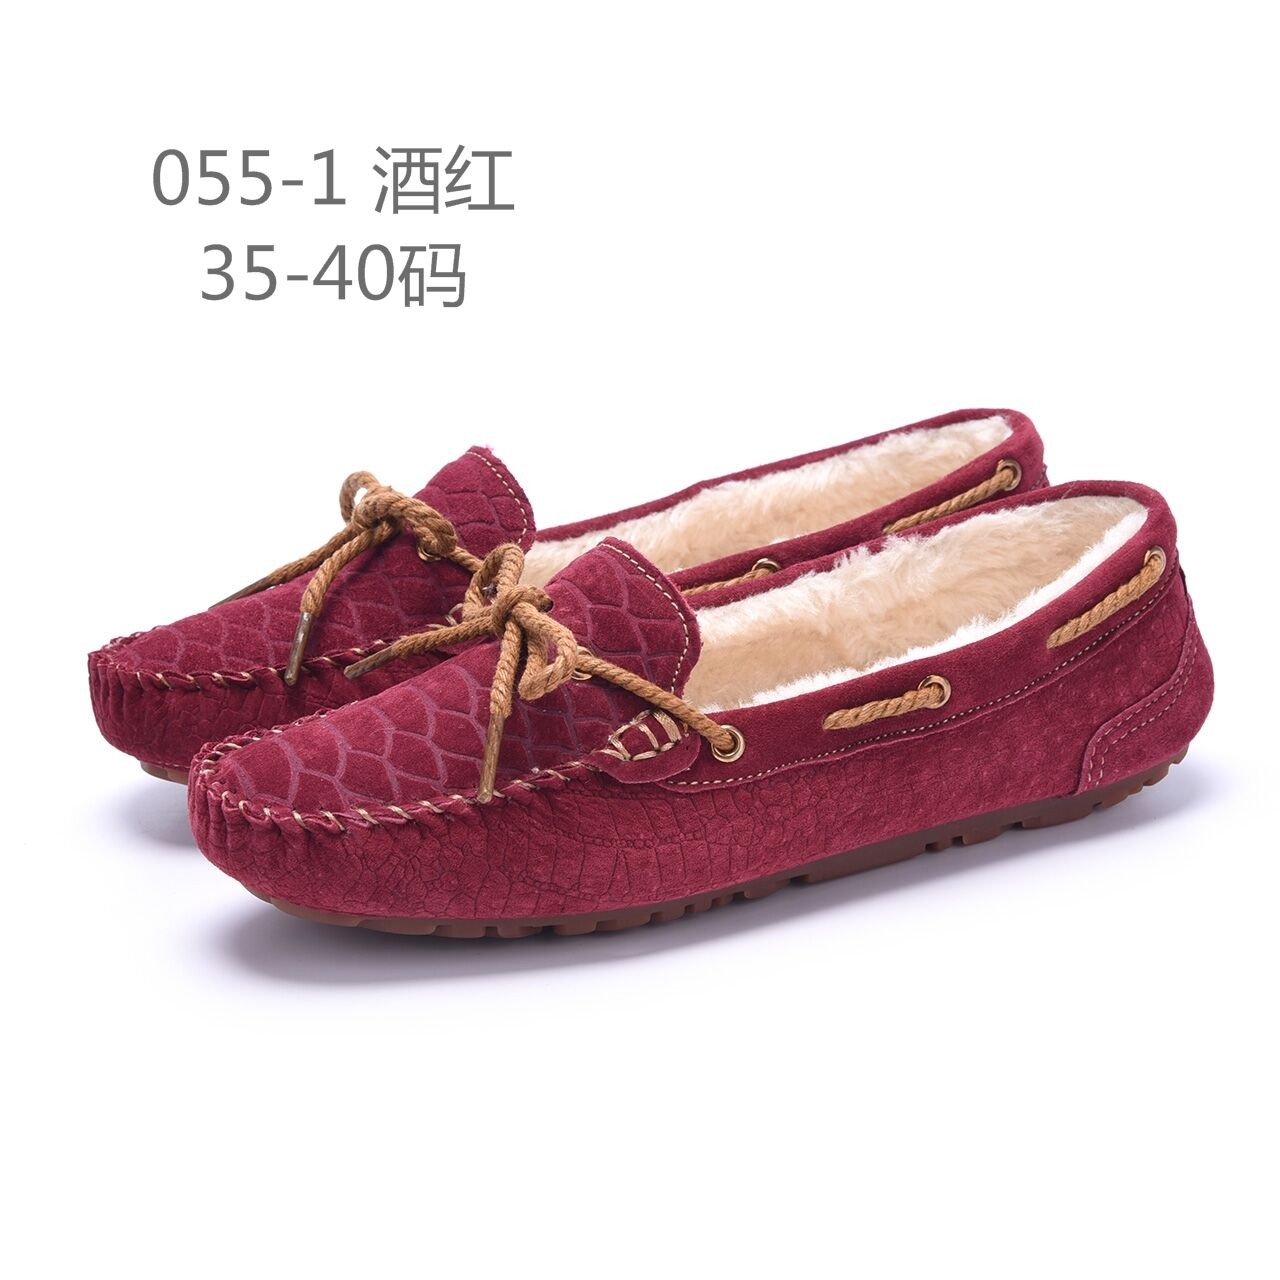 Lastest women leather loafers for winter Manufacturers, Lastest women leather loafers for winter Factory, Supply Lastest women leather loafers for winter